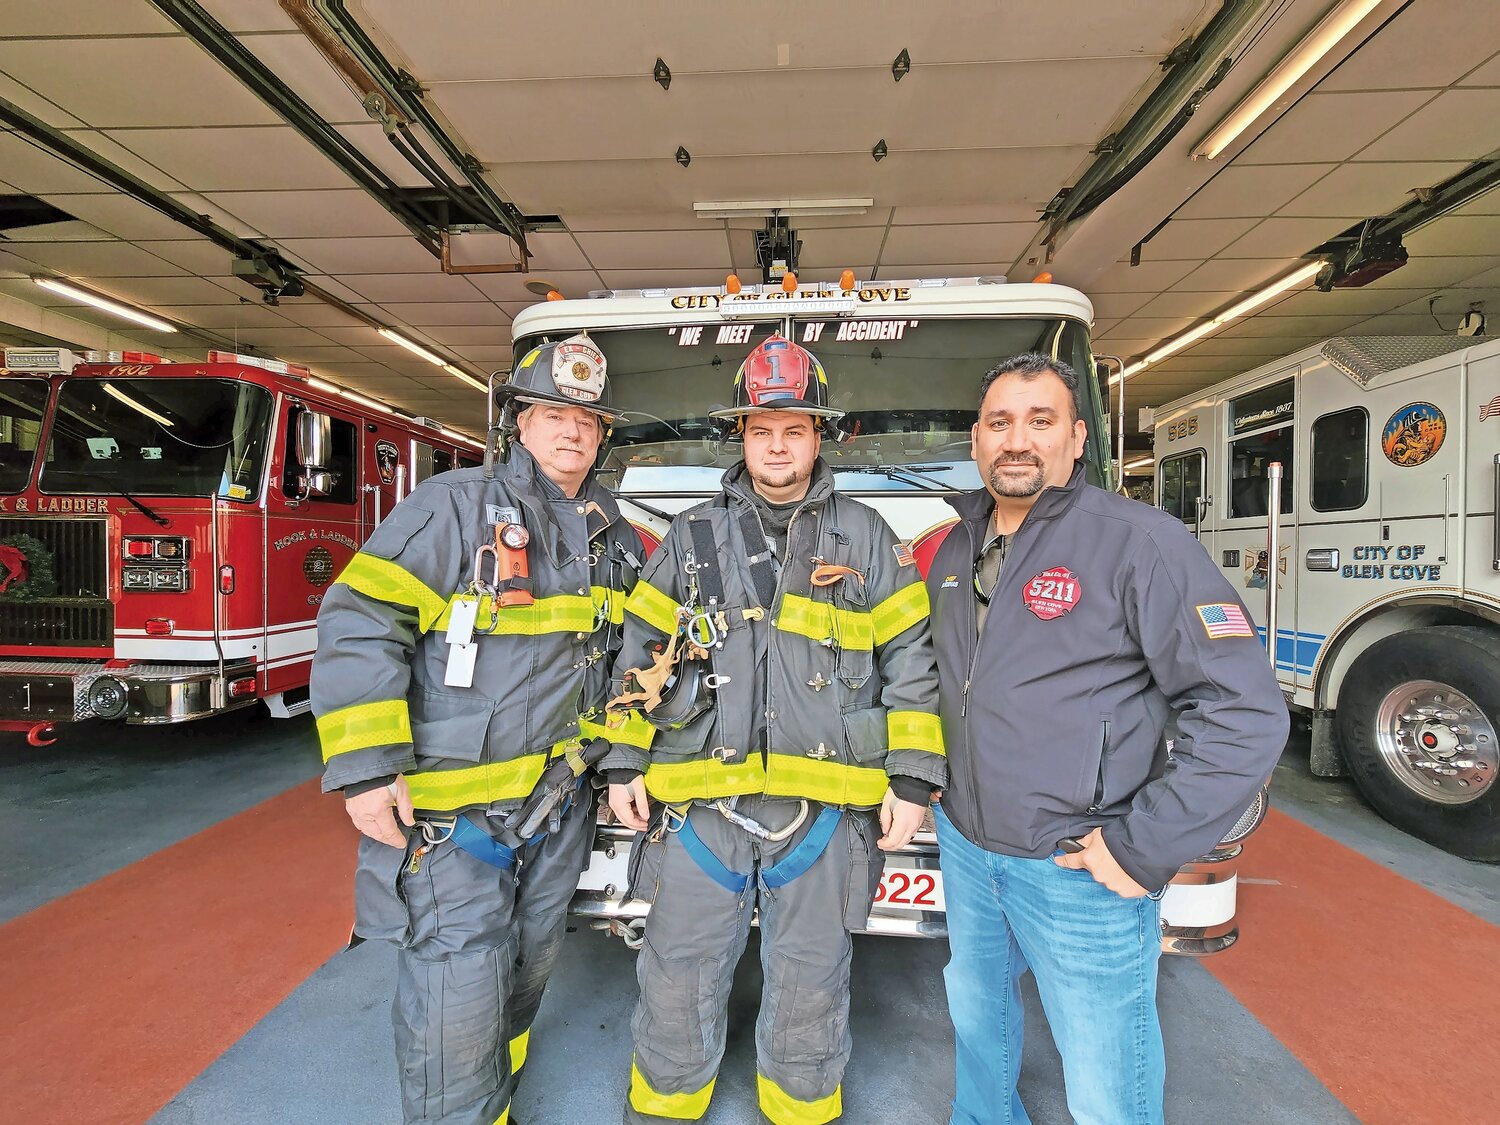 Volunteers Dave Spy, Andrew Melillo and Carlos Cardenas after responding to a carbon dioxide alarm at the Webb Institute last year. They are encouraging community members to volunteer at the fire station.